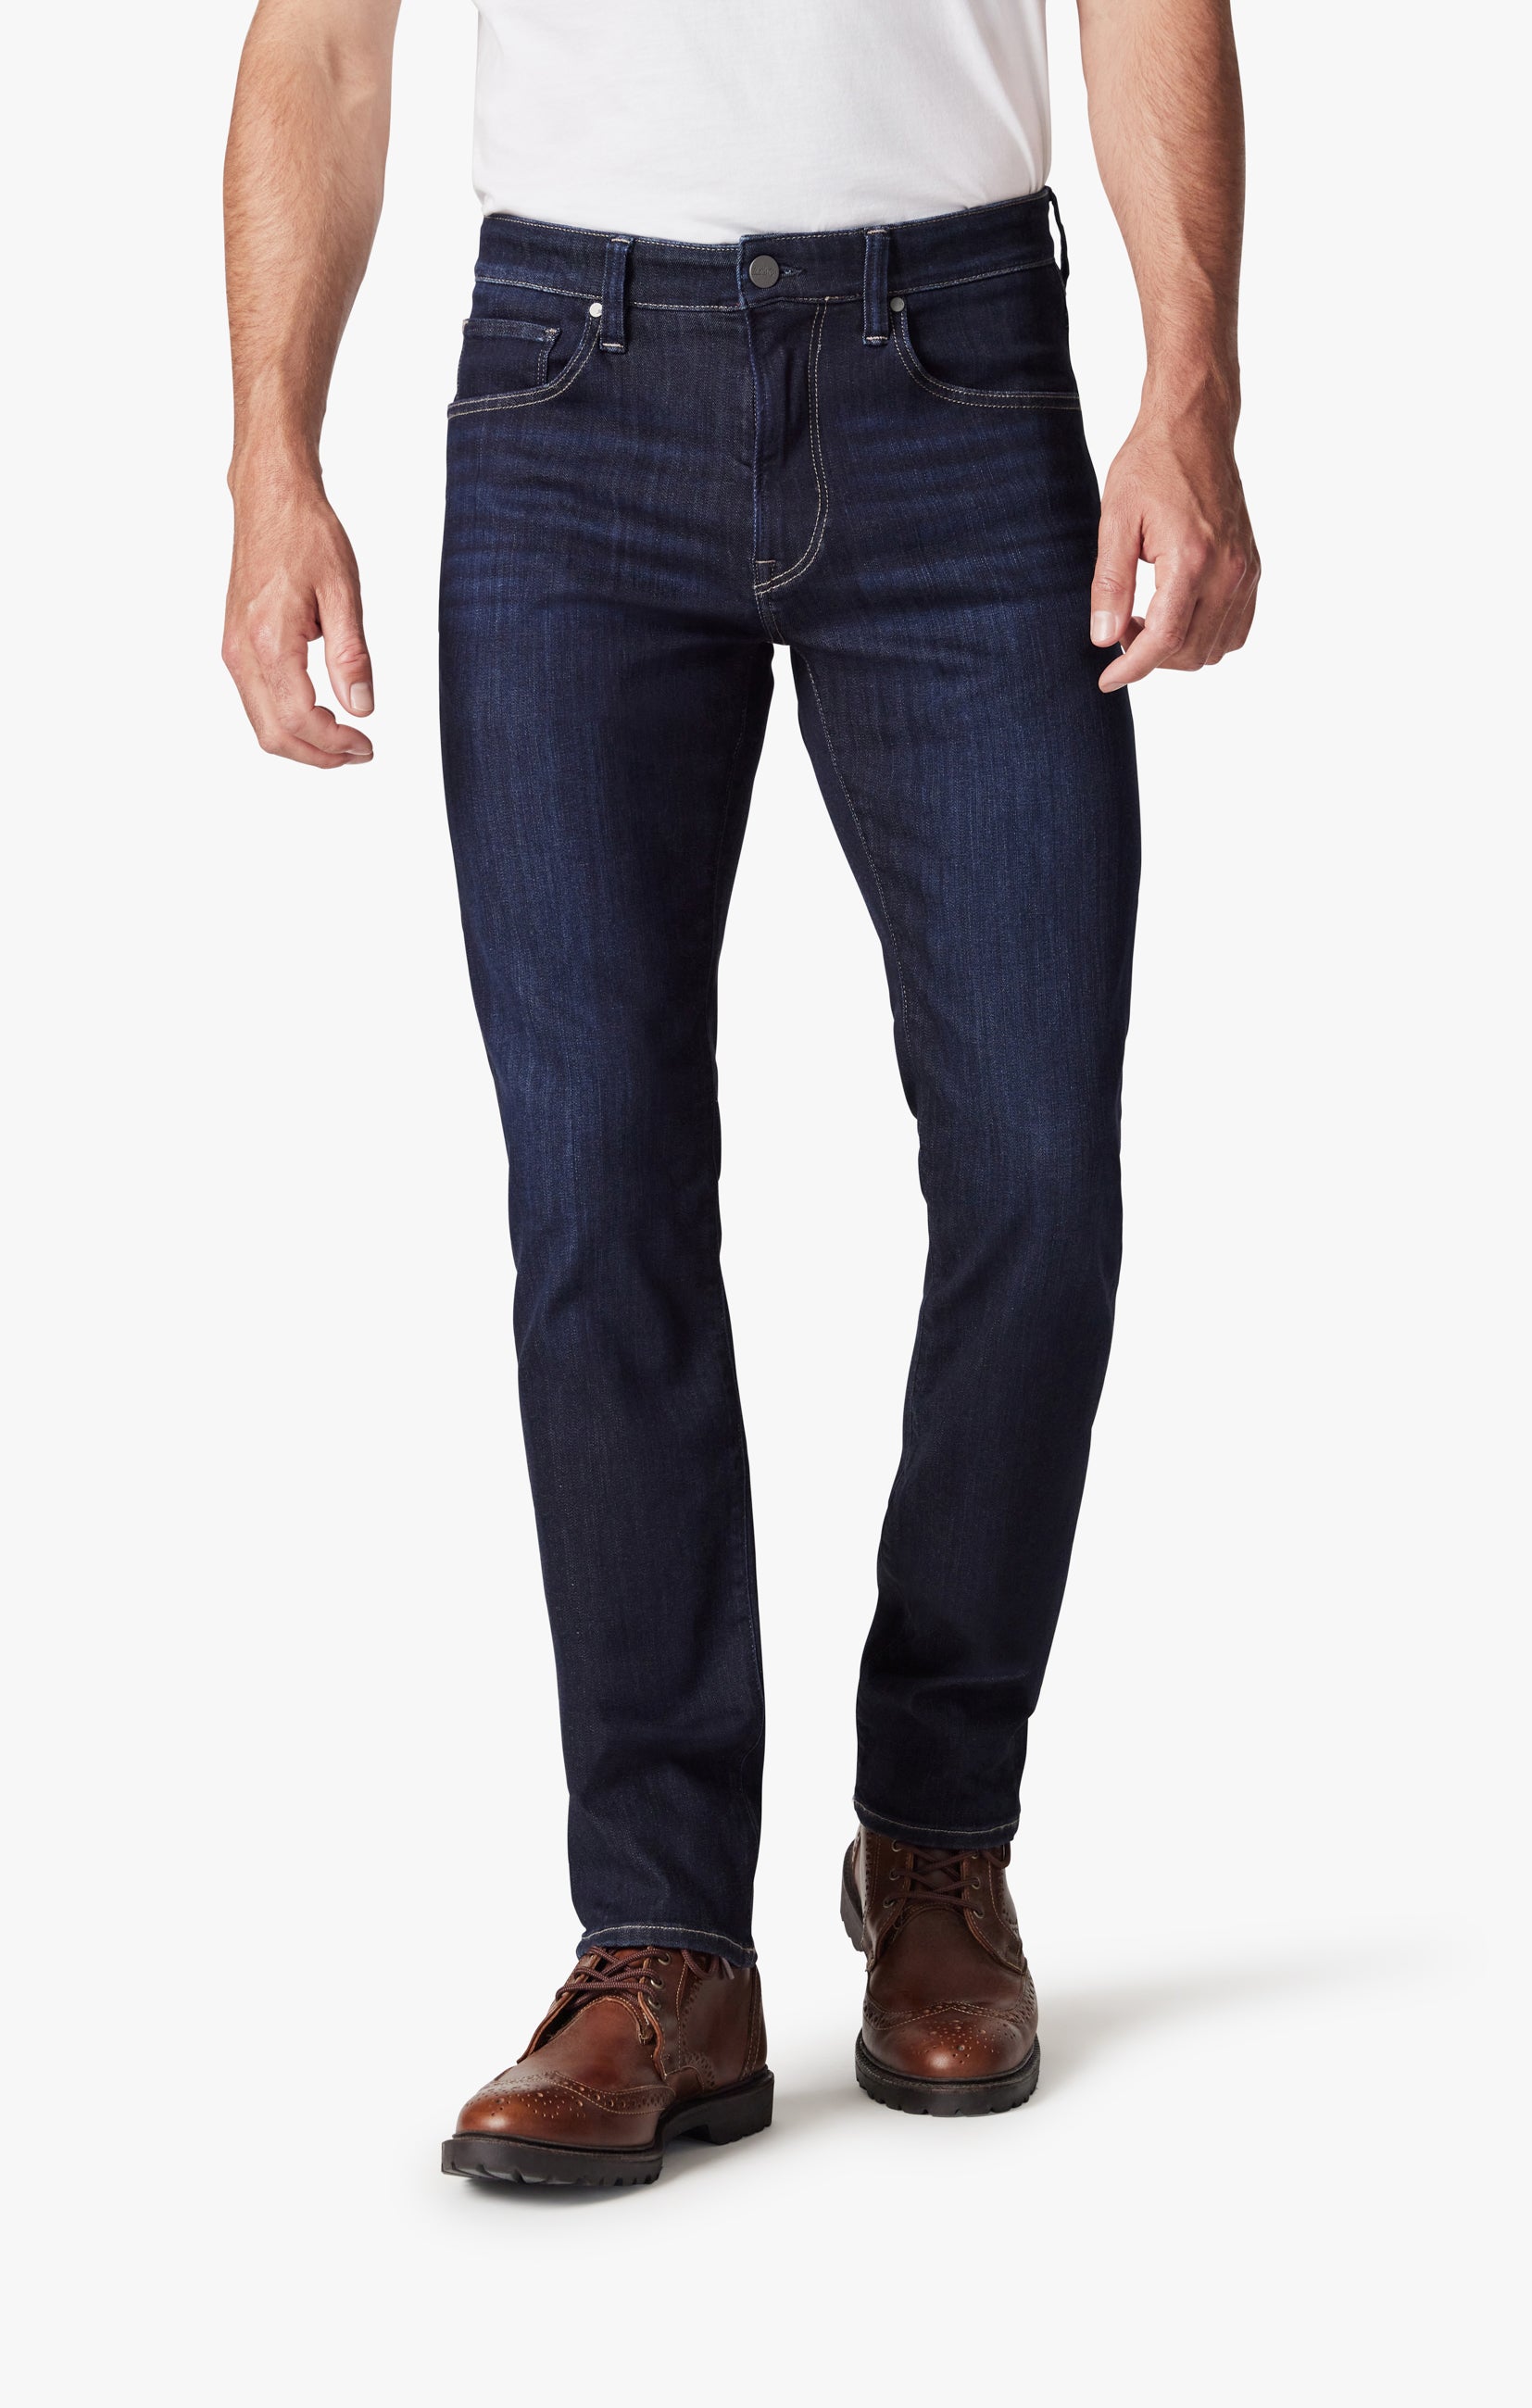 Champ Athletic Fit Jeans in Deep Refined Image 3